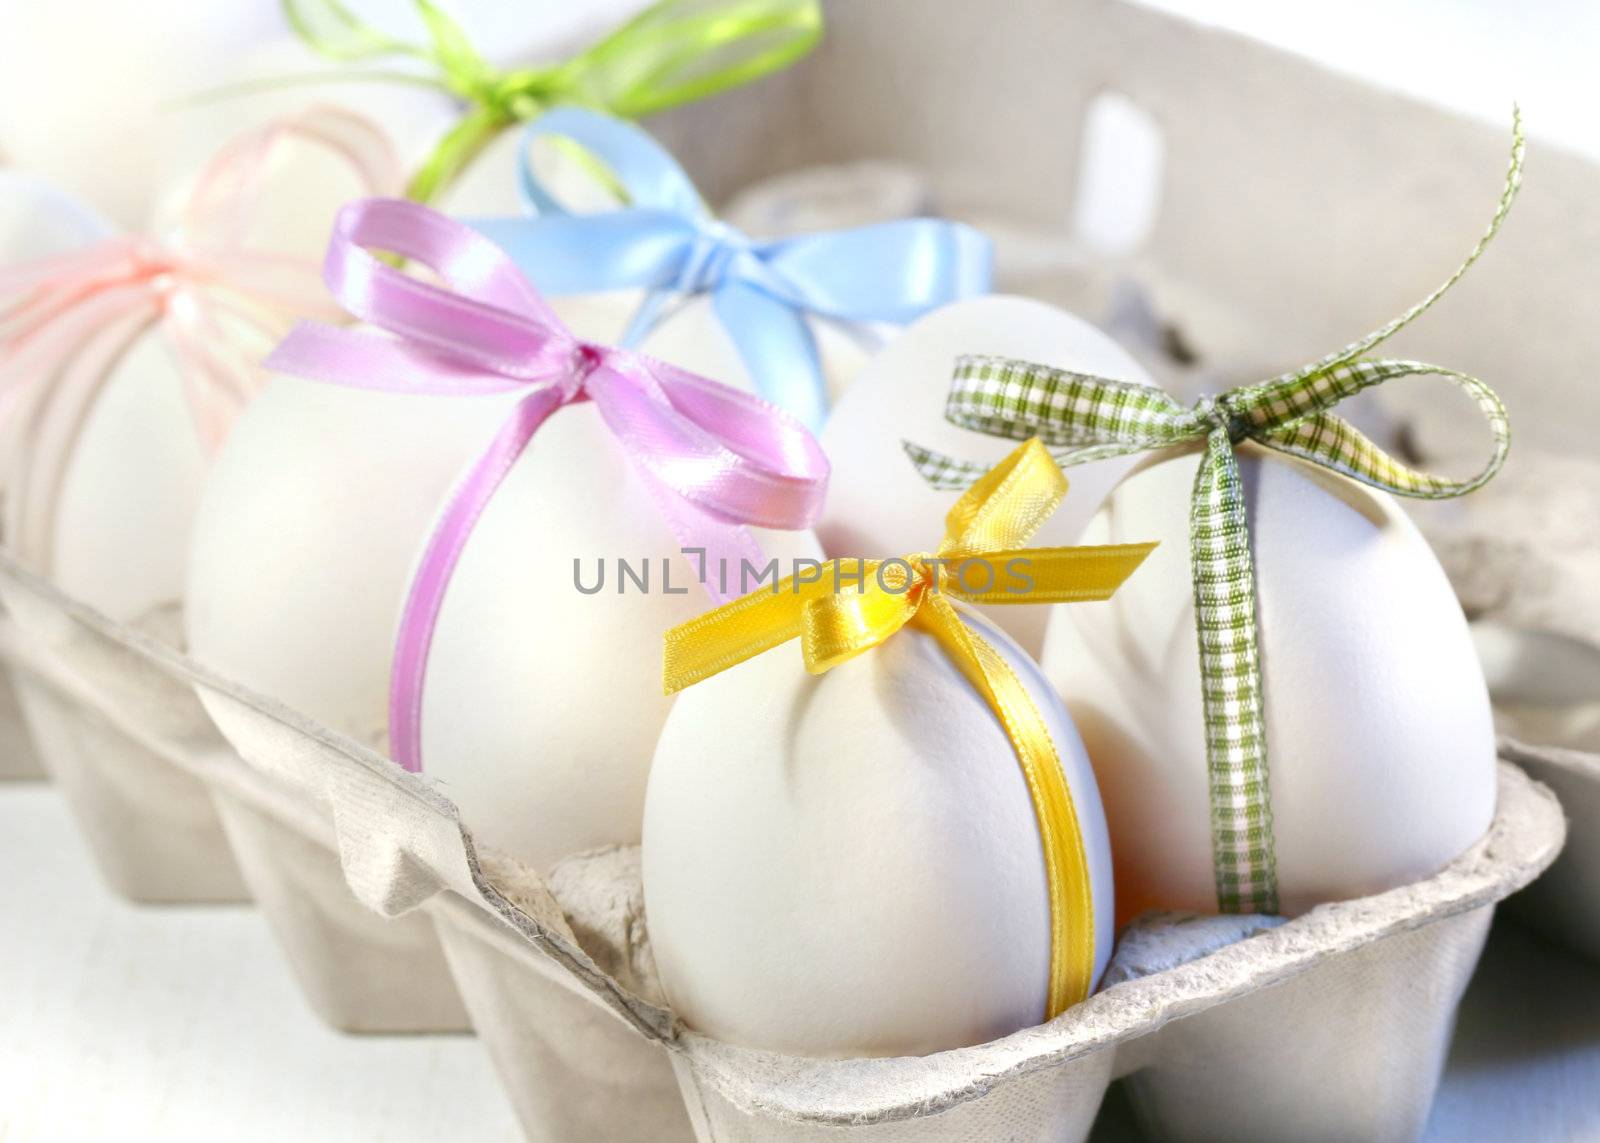 White eggs with colored ribbons  by Sandralise